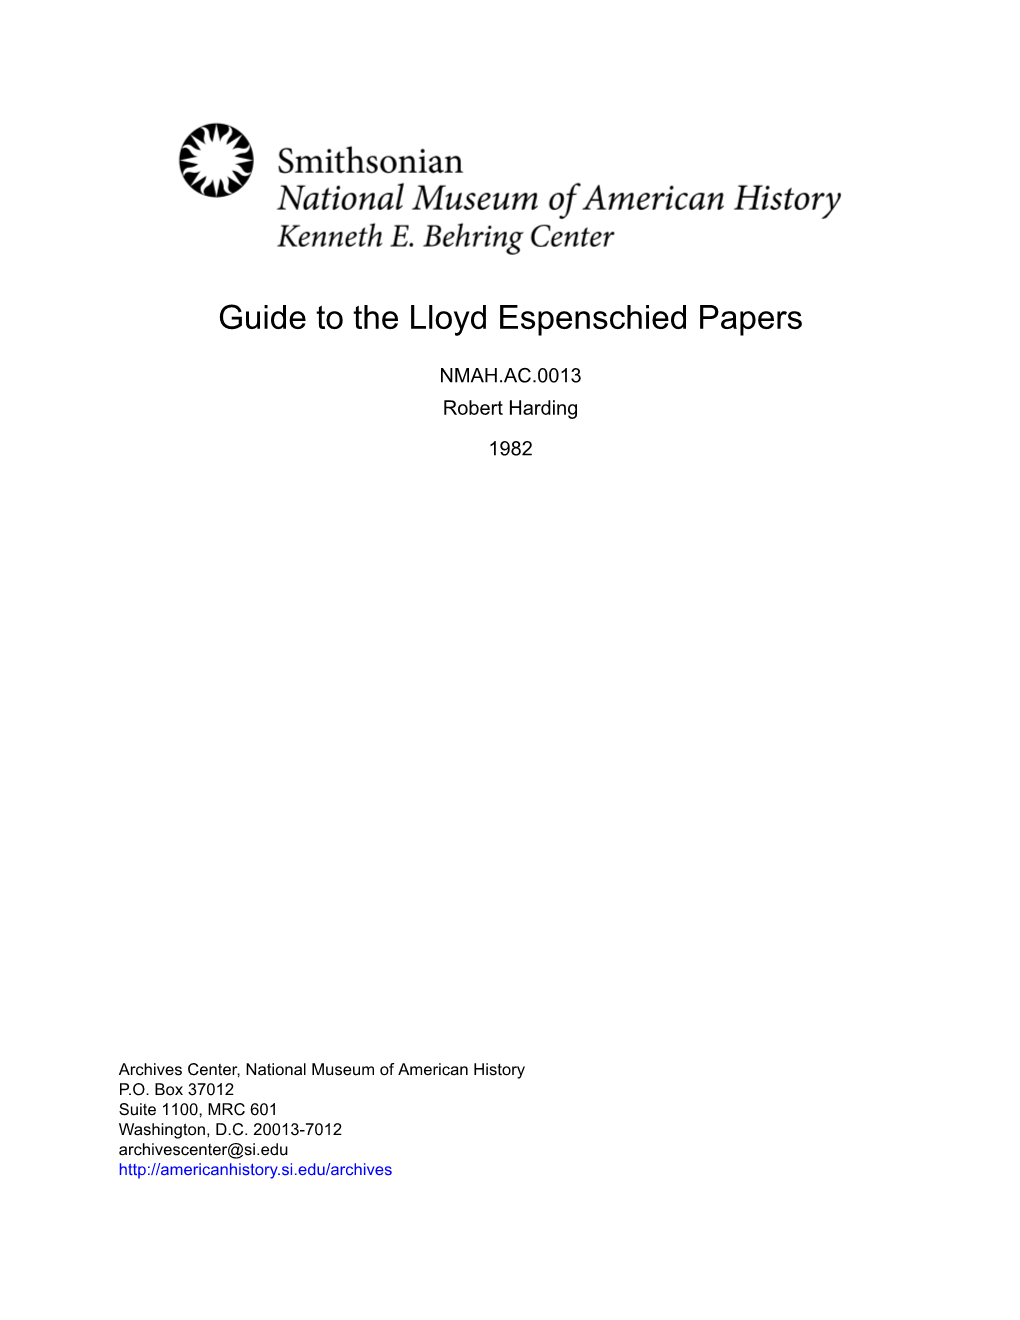 Guide to the Lloyd Espenschied Papers